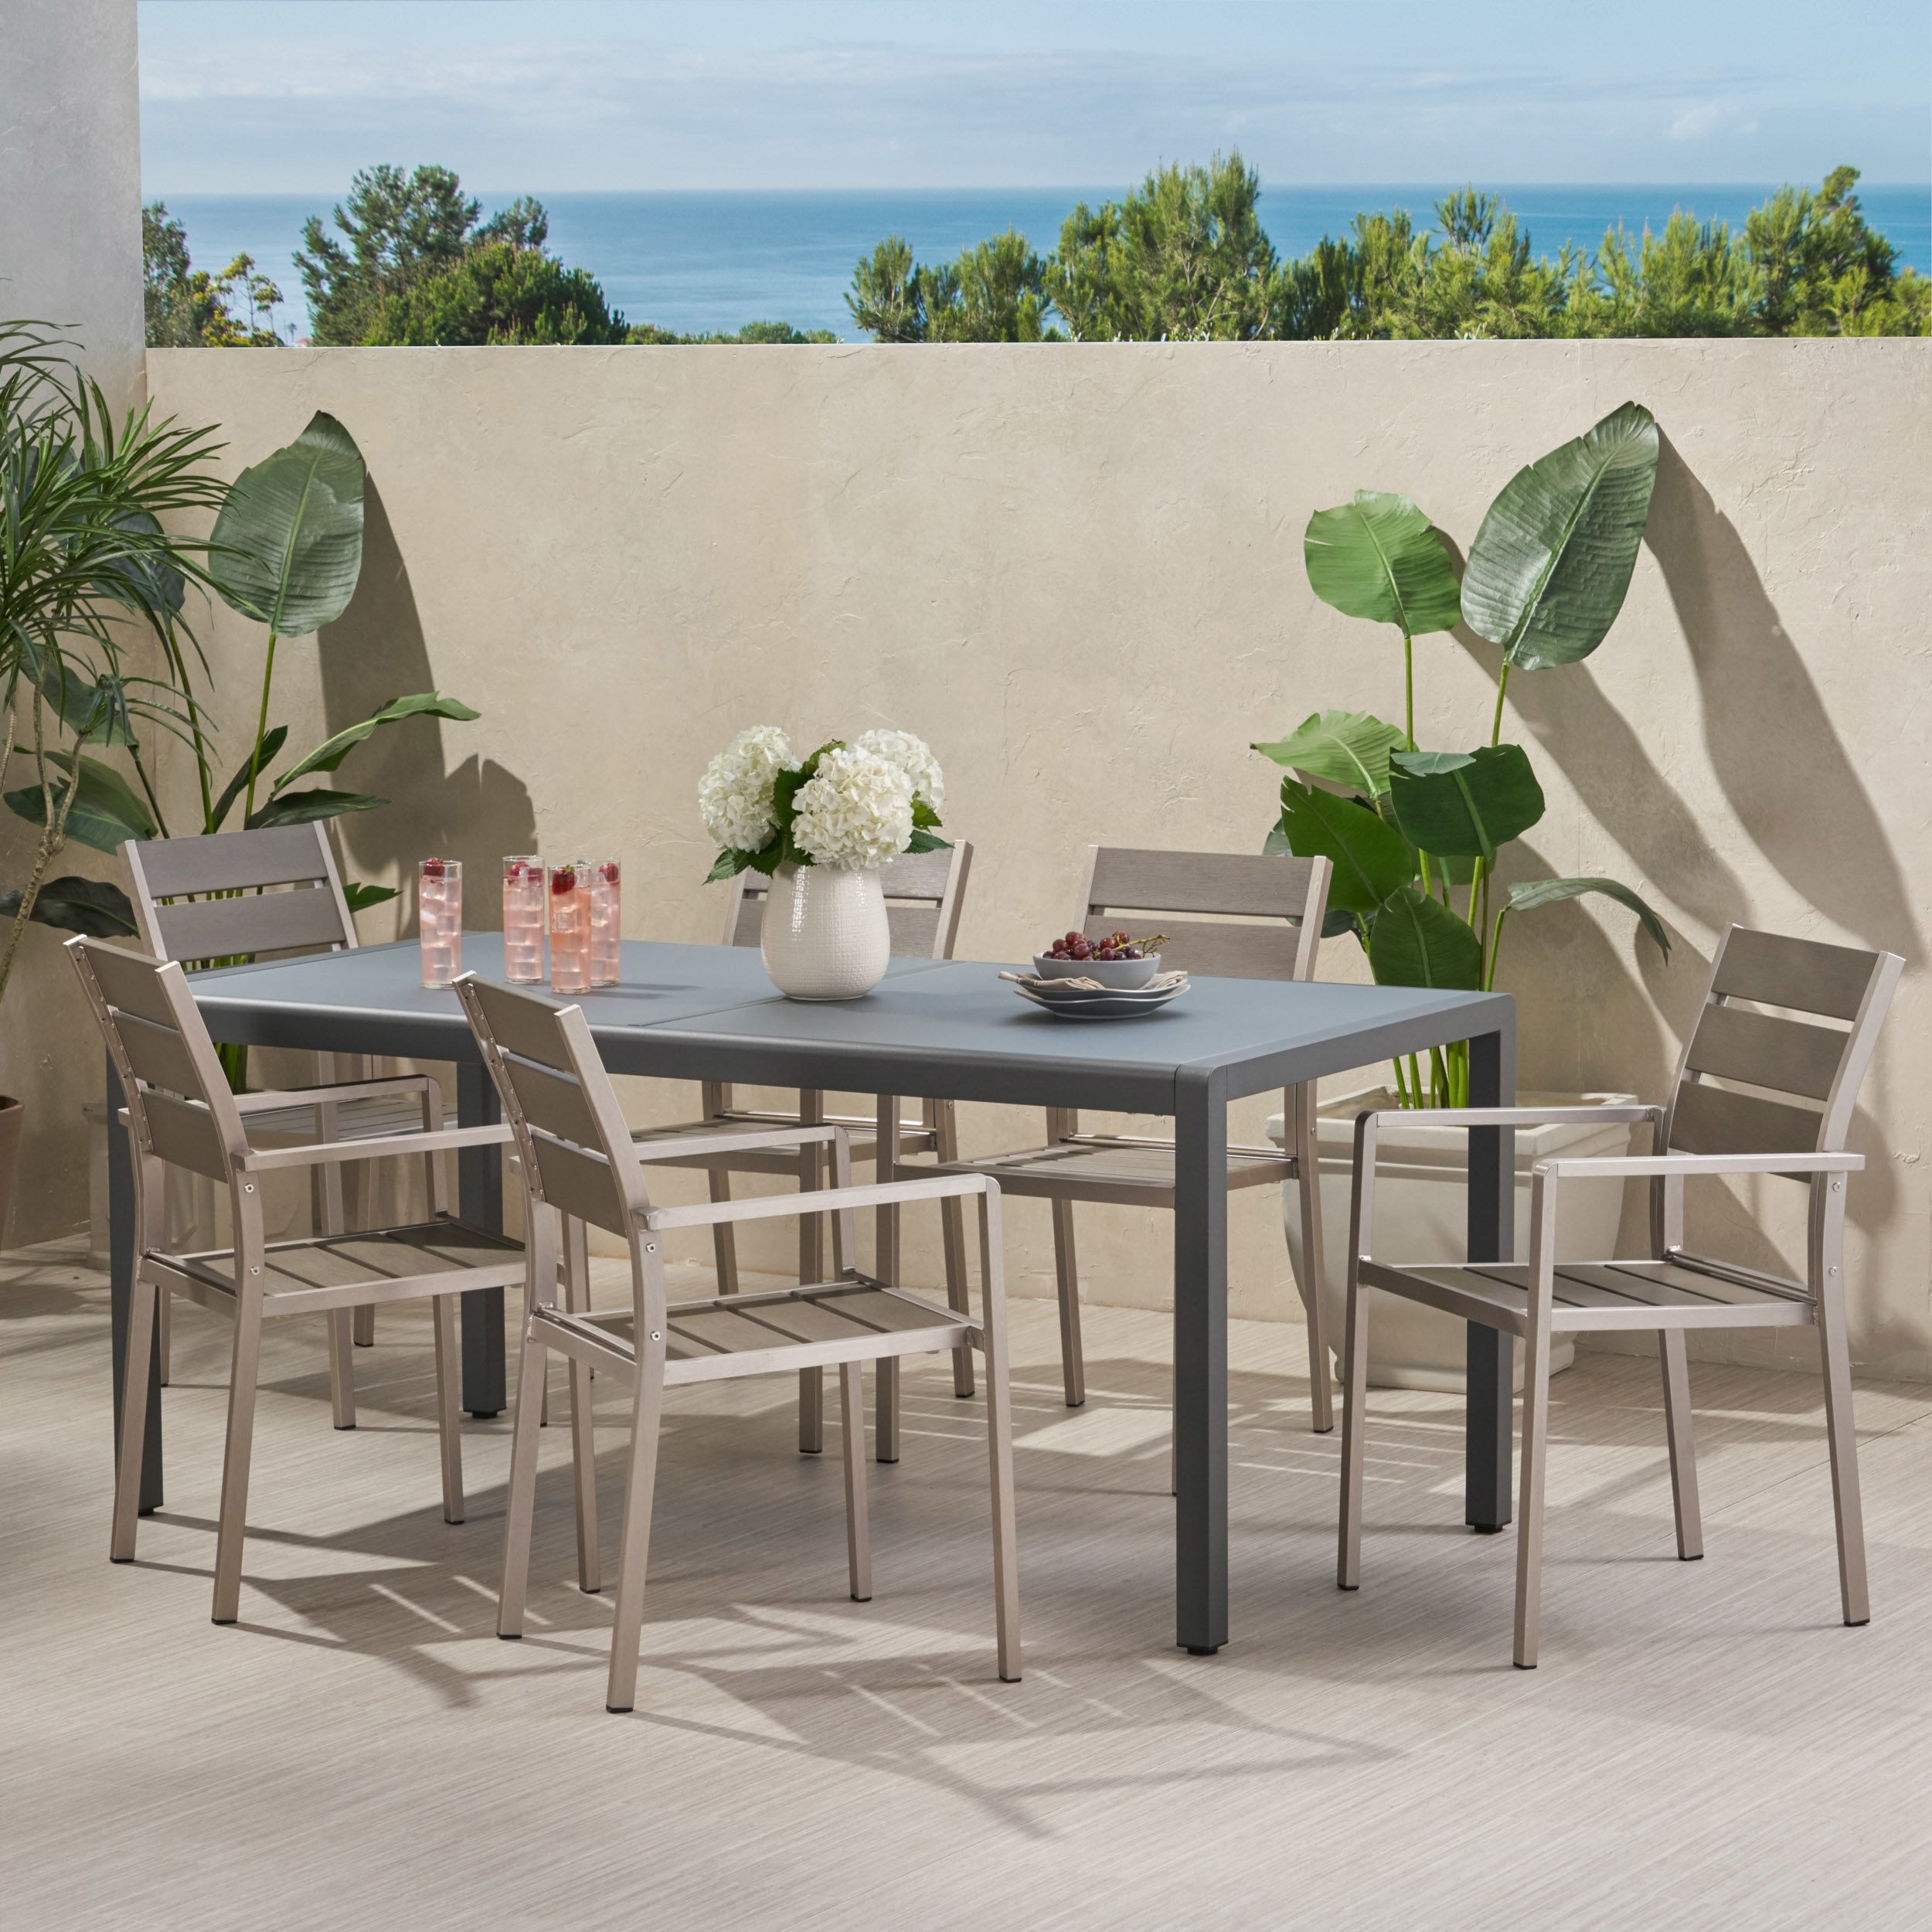 Miranda Outdoor Modern 6 Seater Aluminum Dining Set With Tempered Glass Table Top - Gun Metal Gray + Gray + Silver